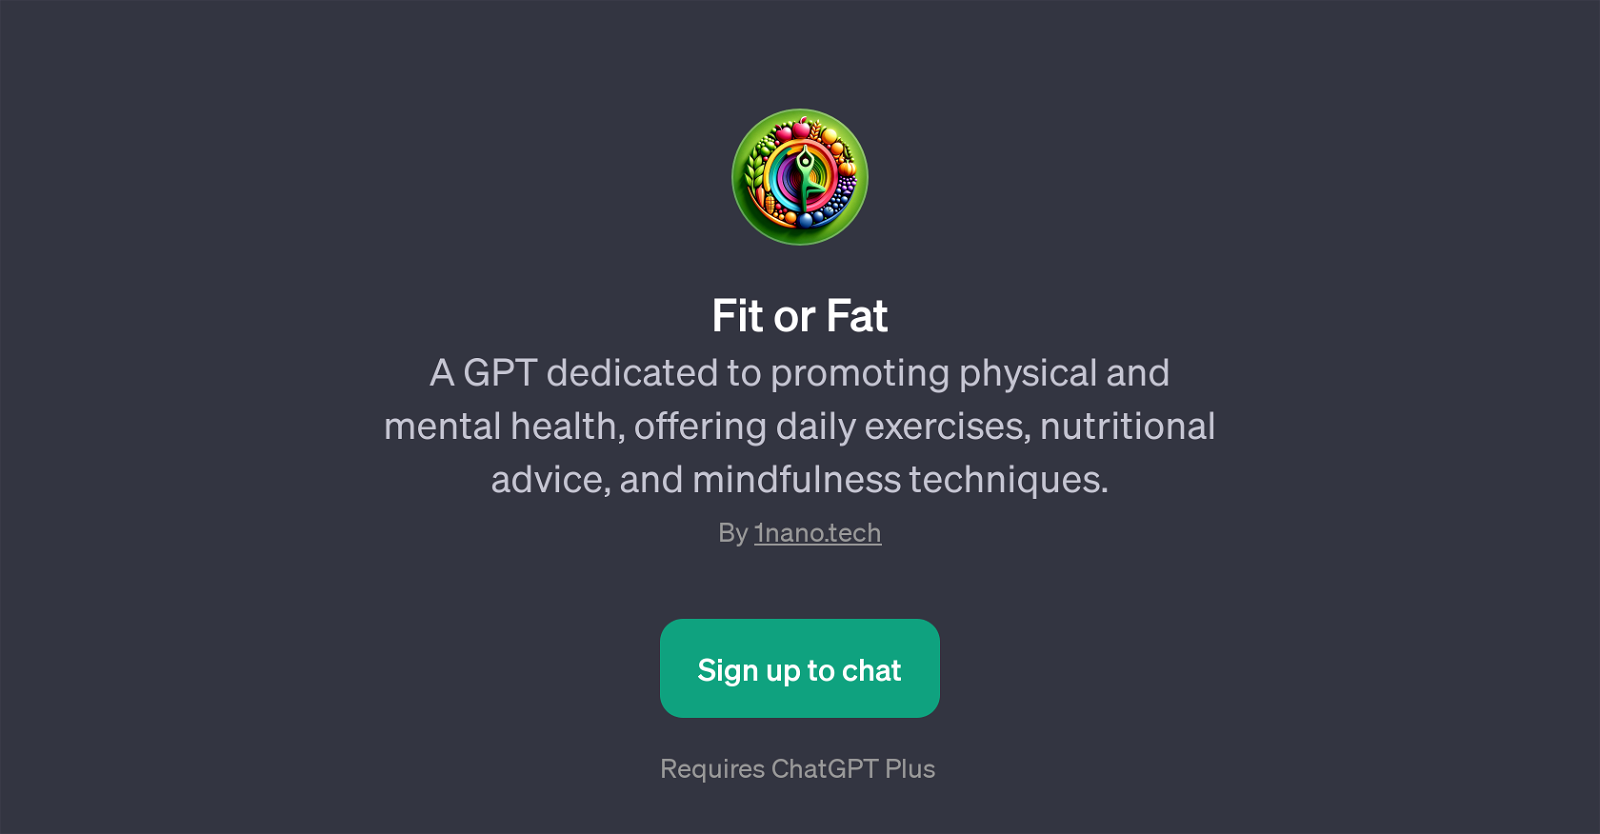 Fit or Fat website